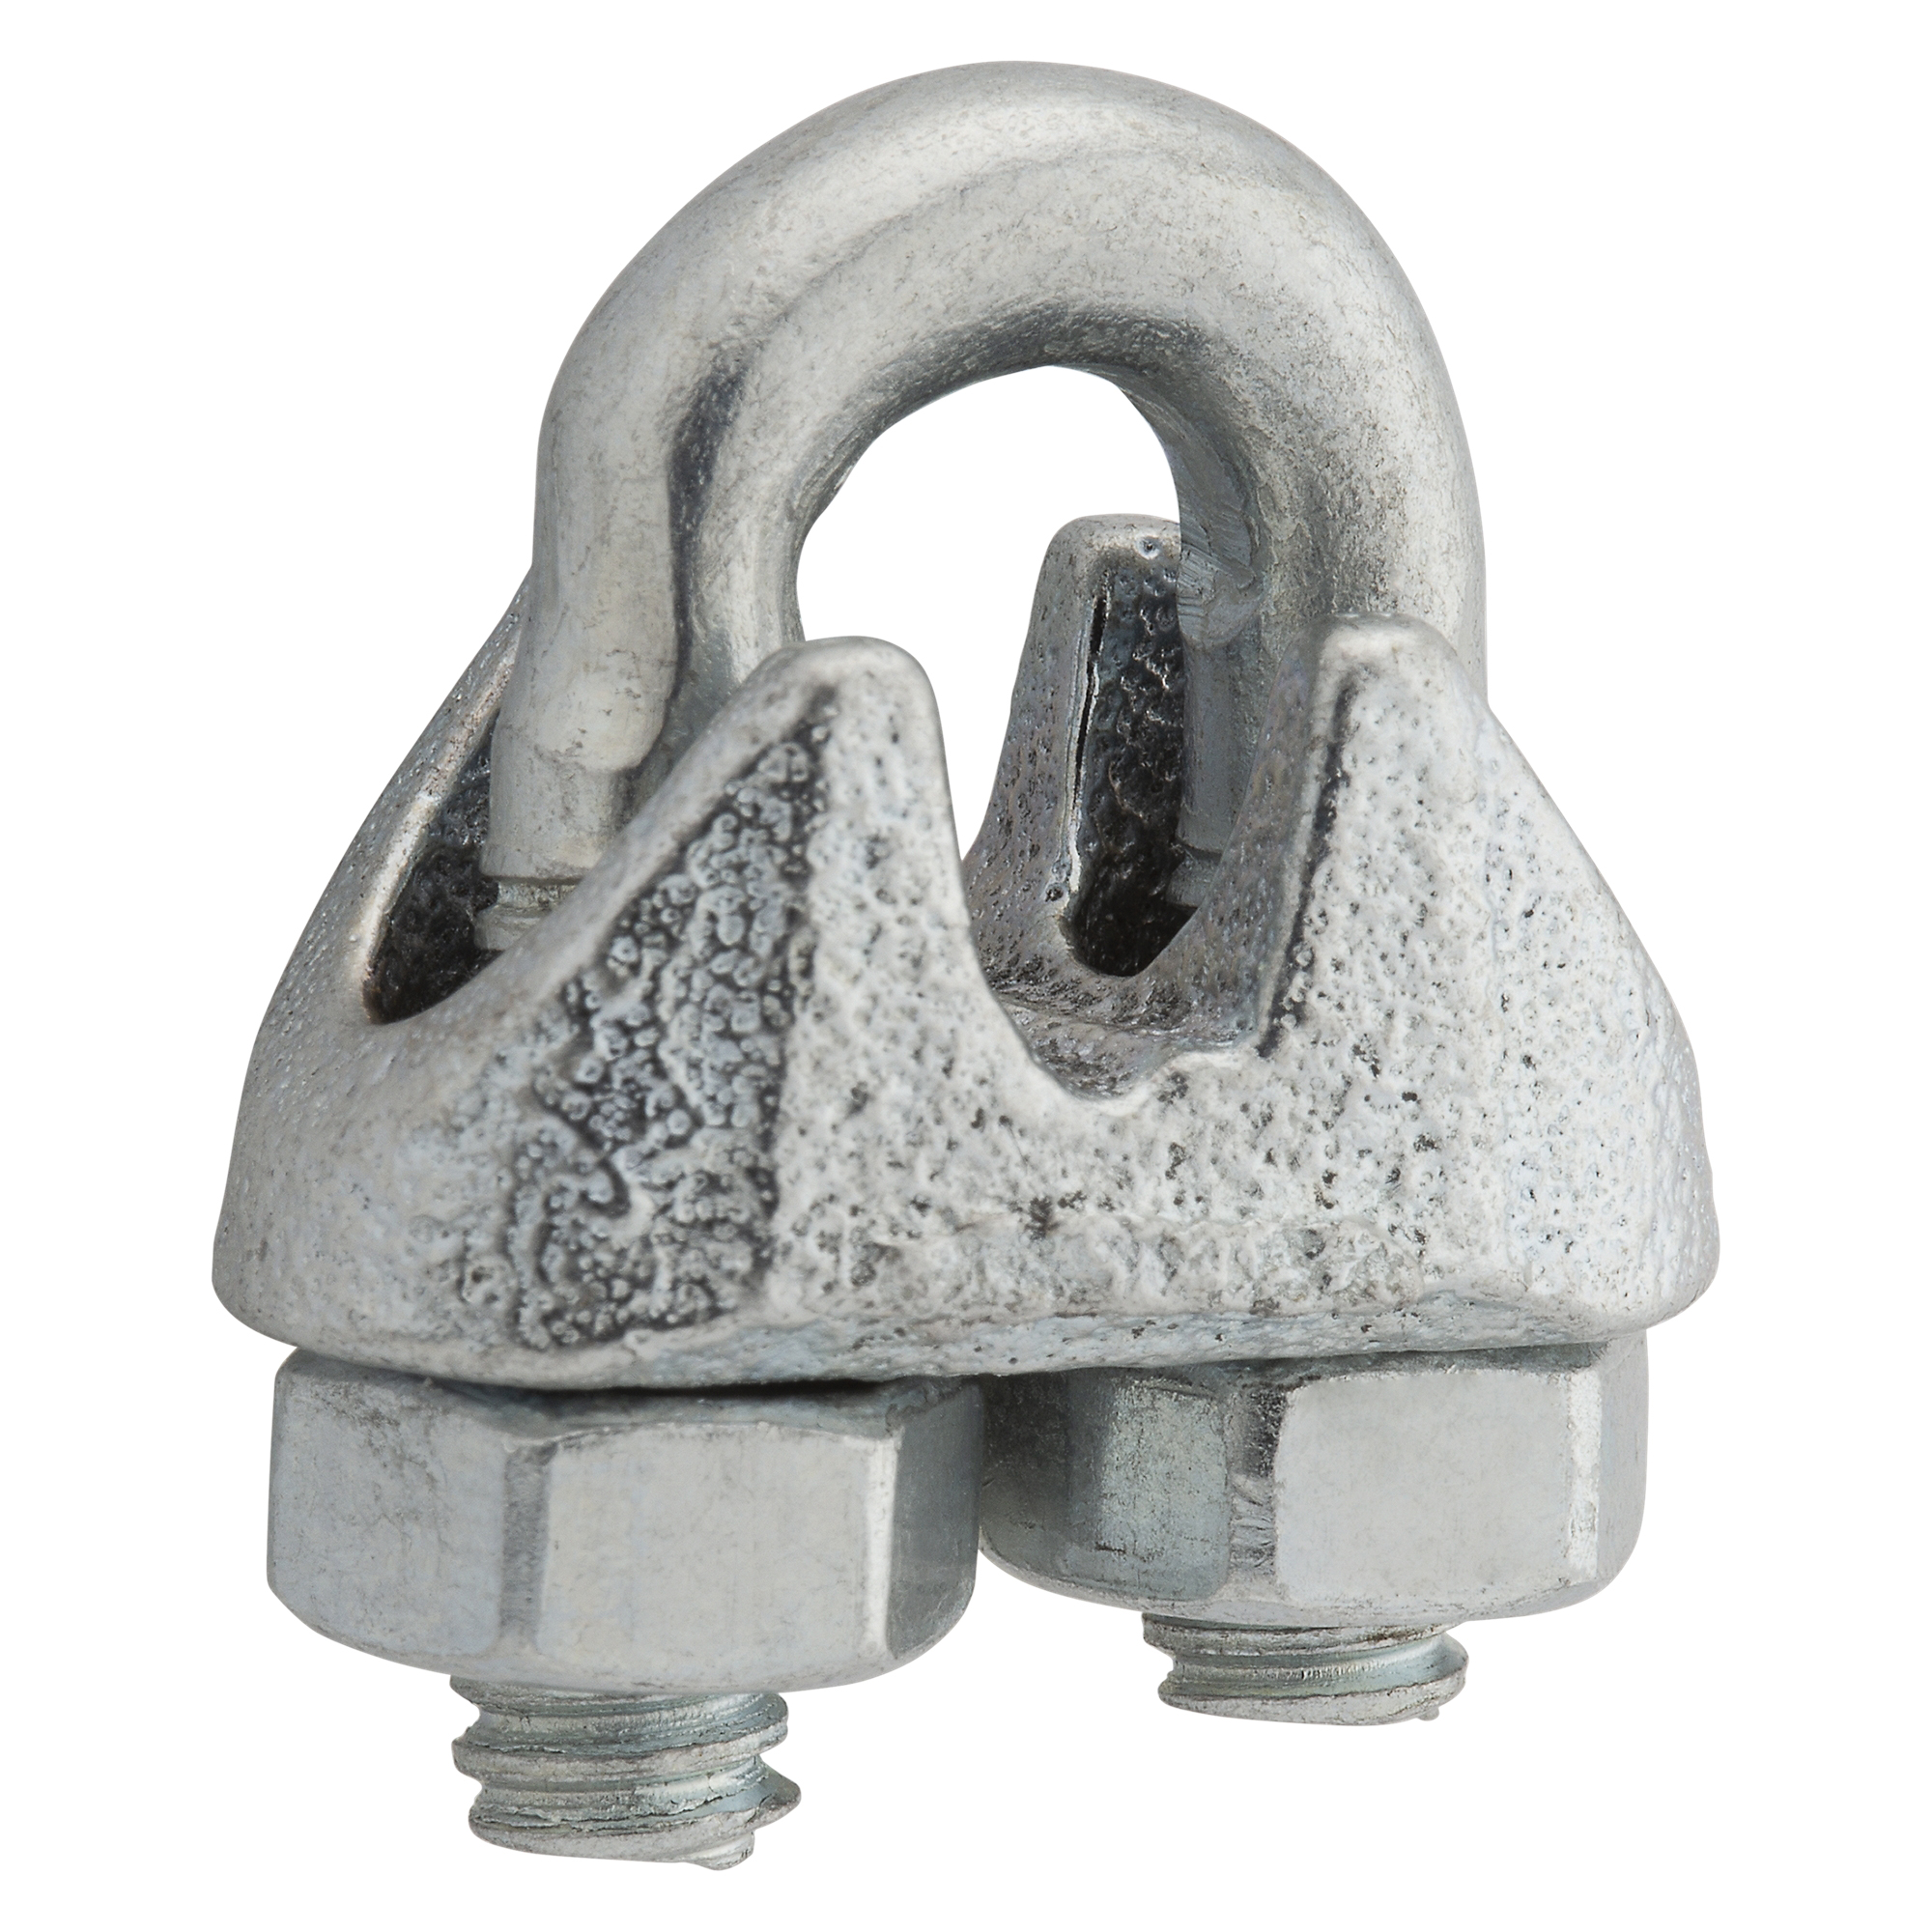 N889-014 Wire Cable Clamp, 3/16 in Dia Cable, 1 in L, Malleable Iron/Steel, Electro Galvanized/Zinc